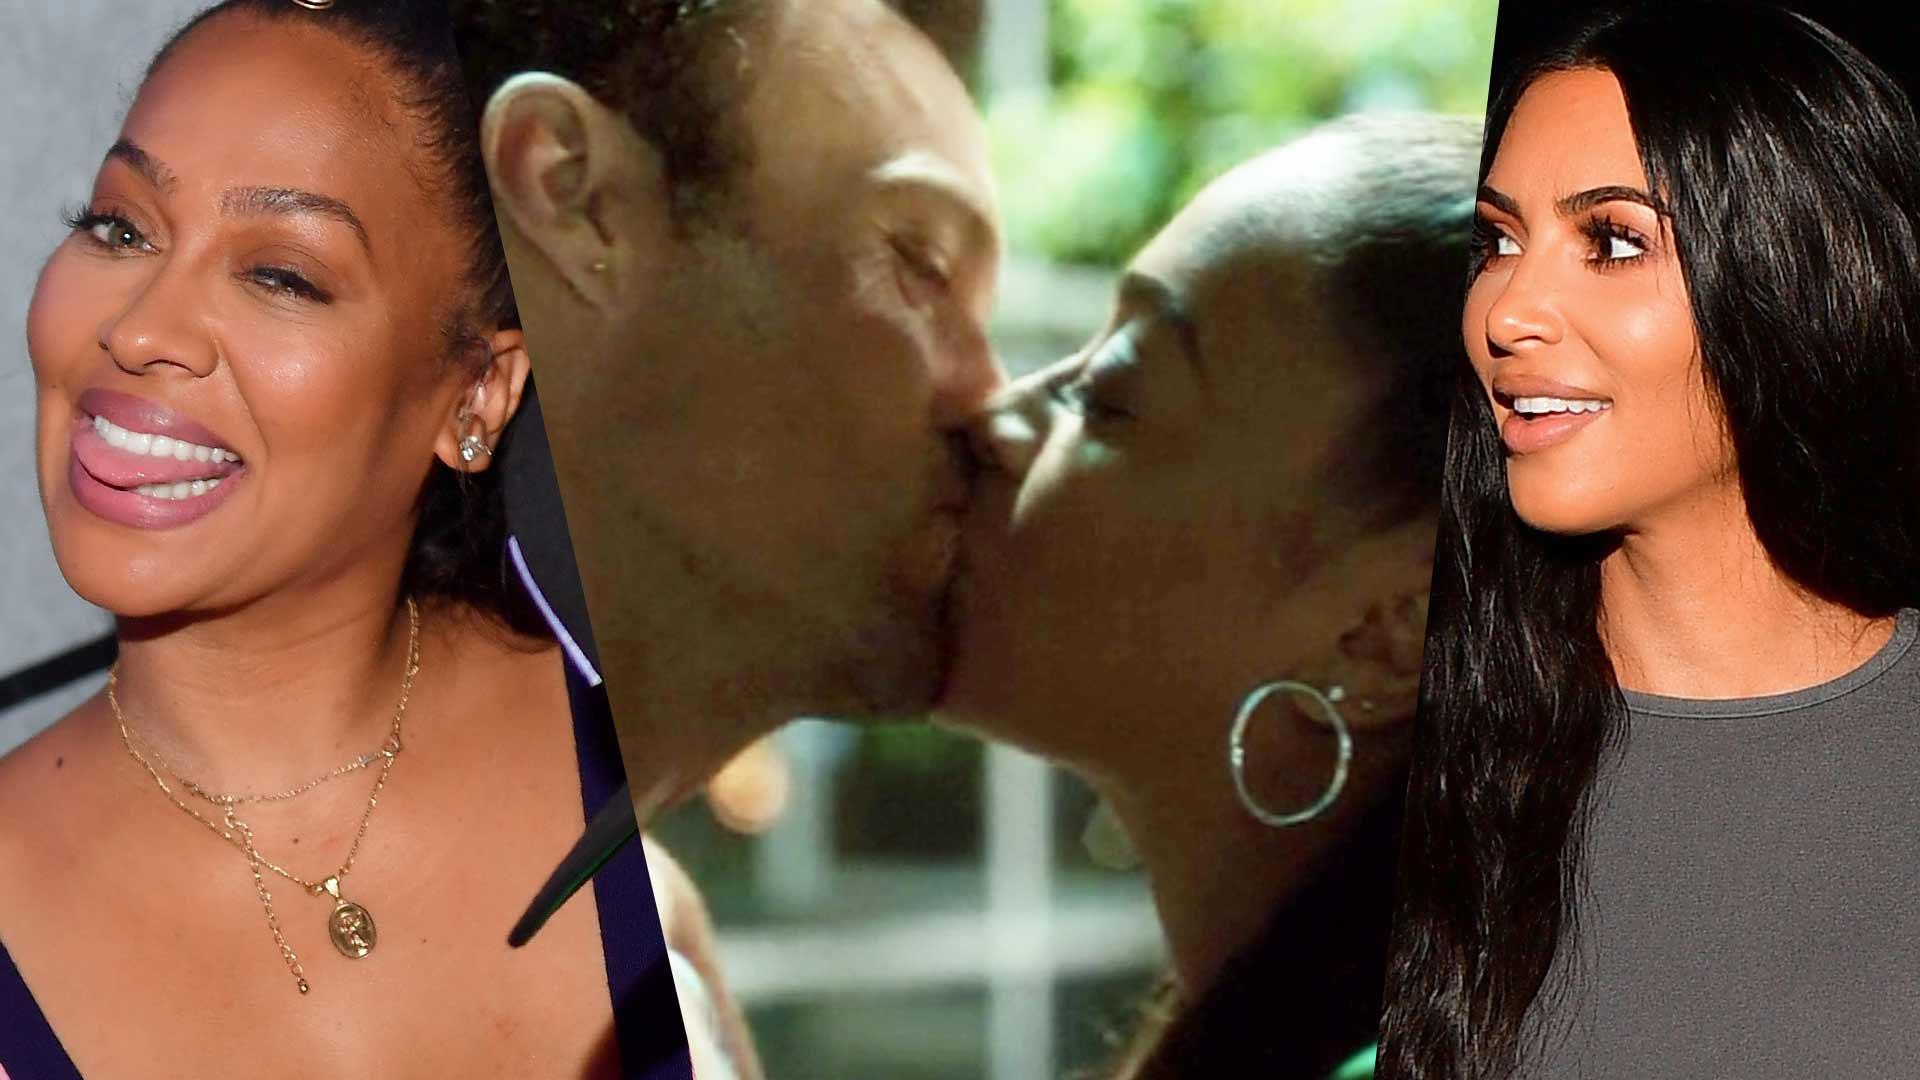 Kim Goes Wild When La La Anthony Makes Out With ‘90210’ Co-star Amid Marriage Trouble